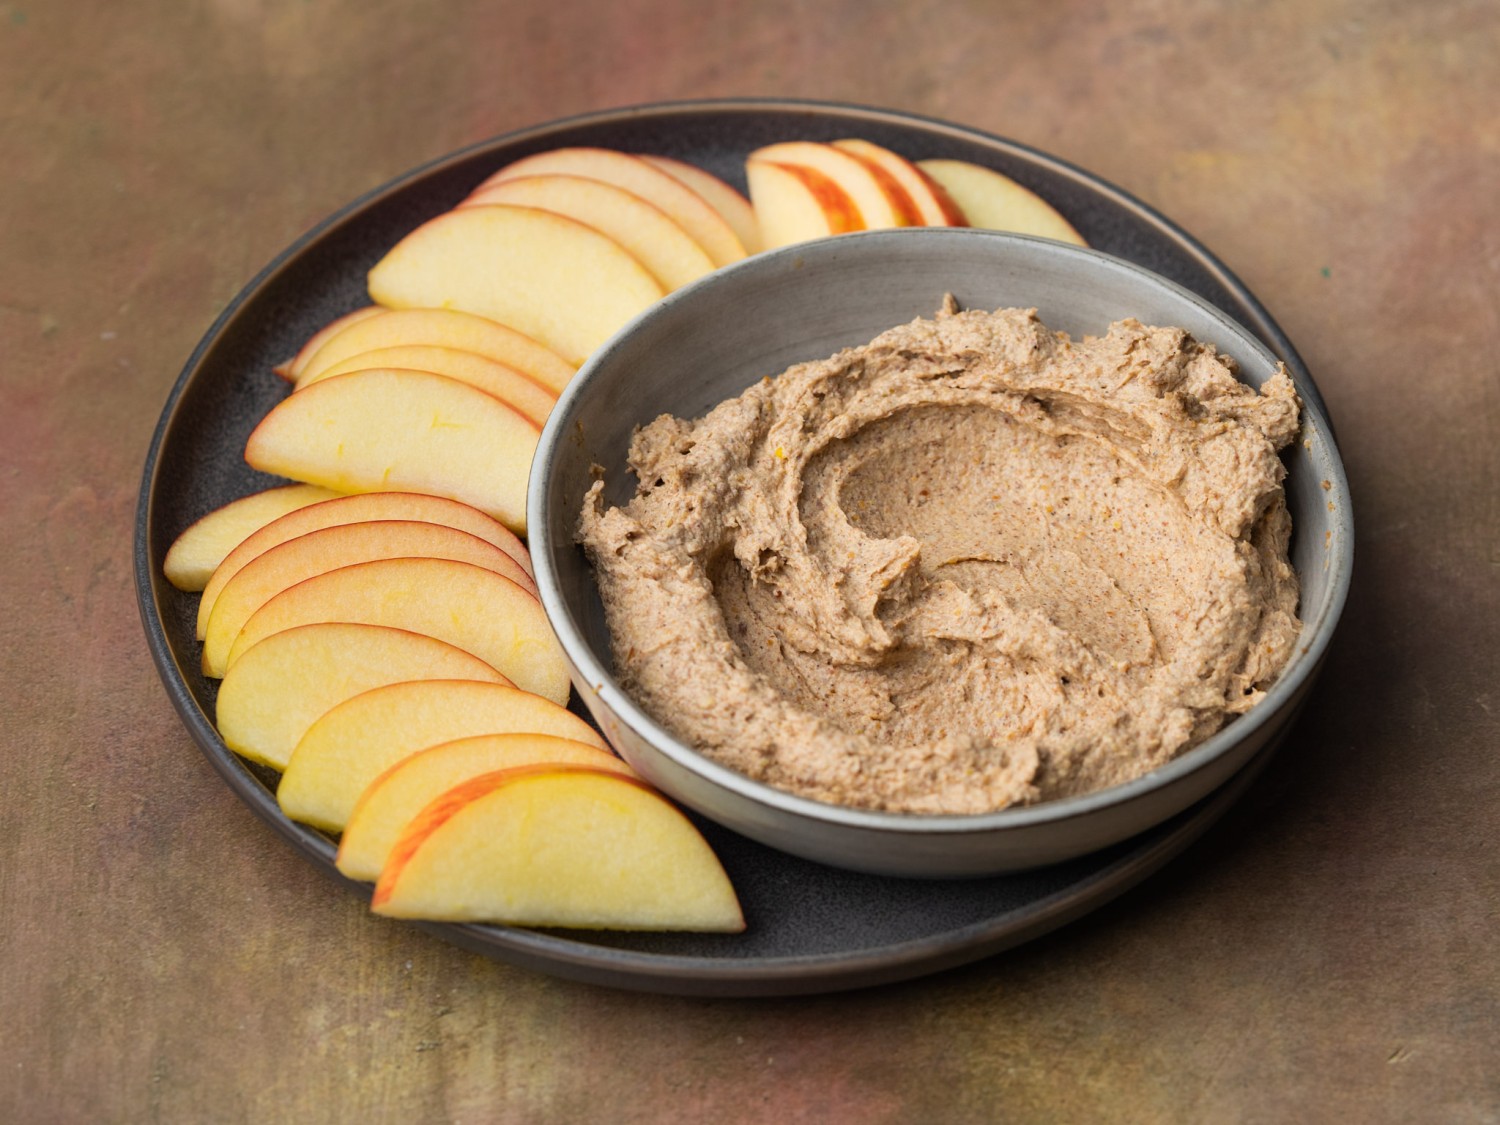 Three quarter view of peanut butter dip with sliced apples